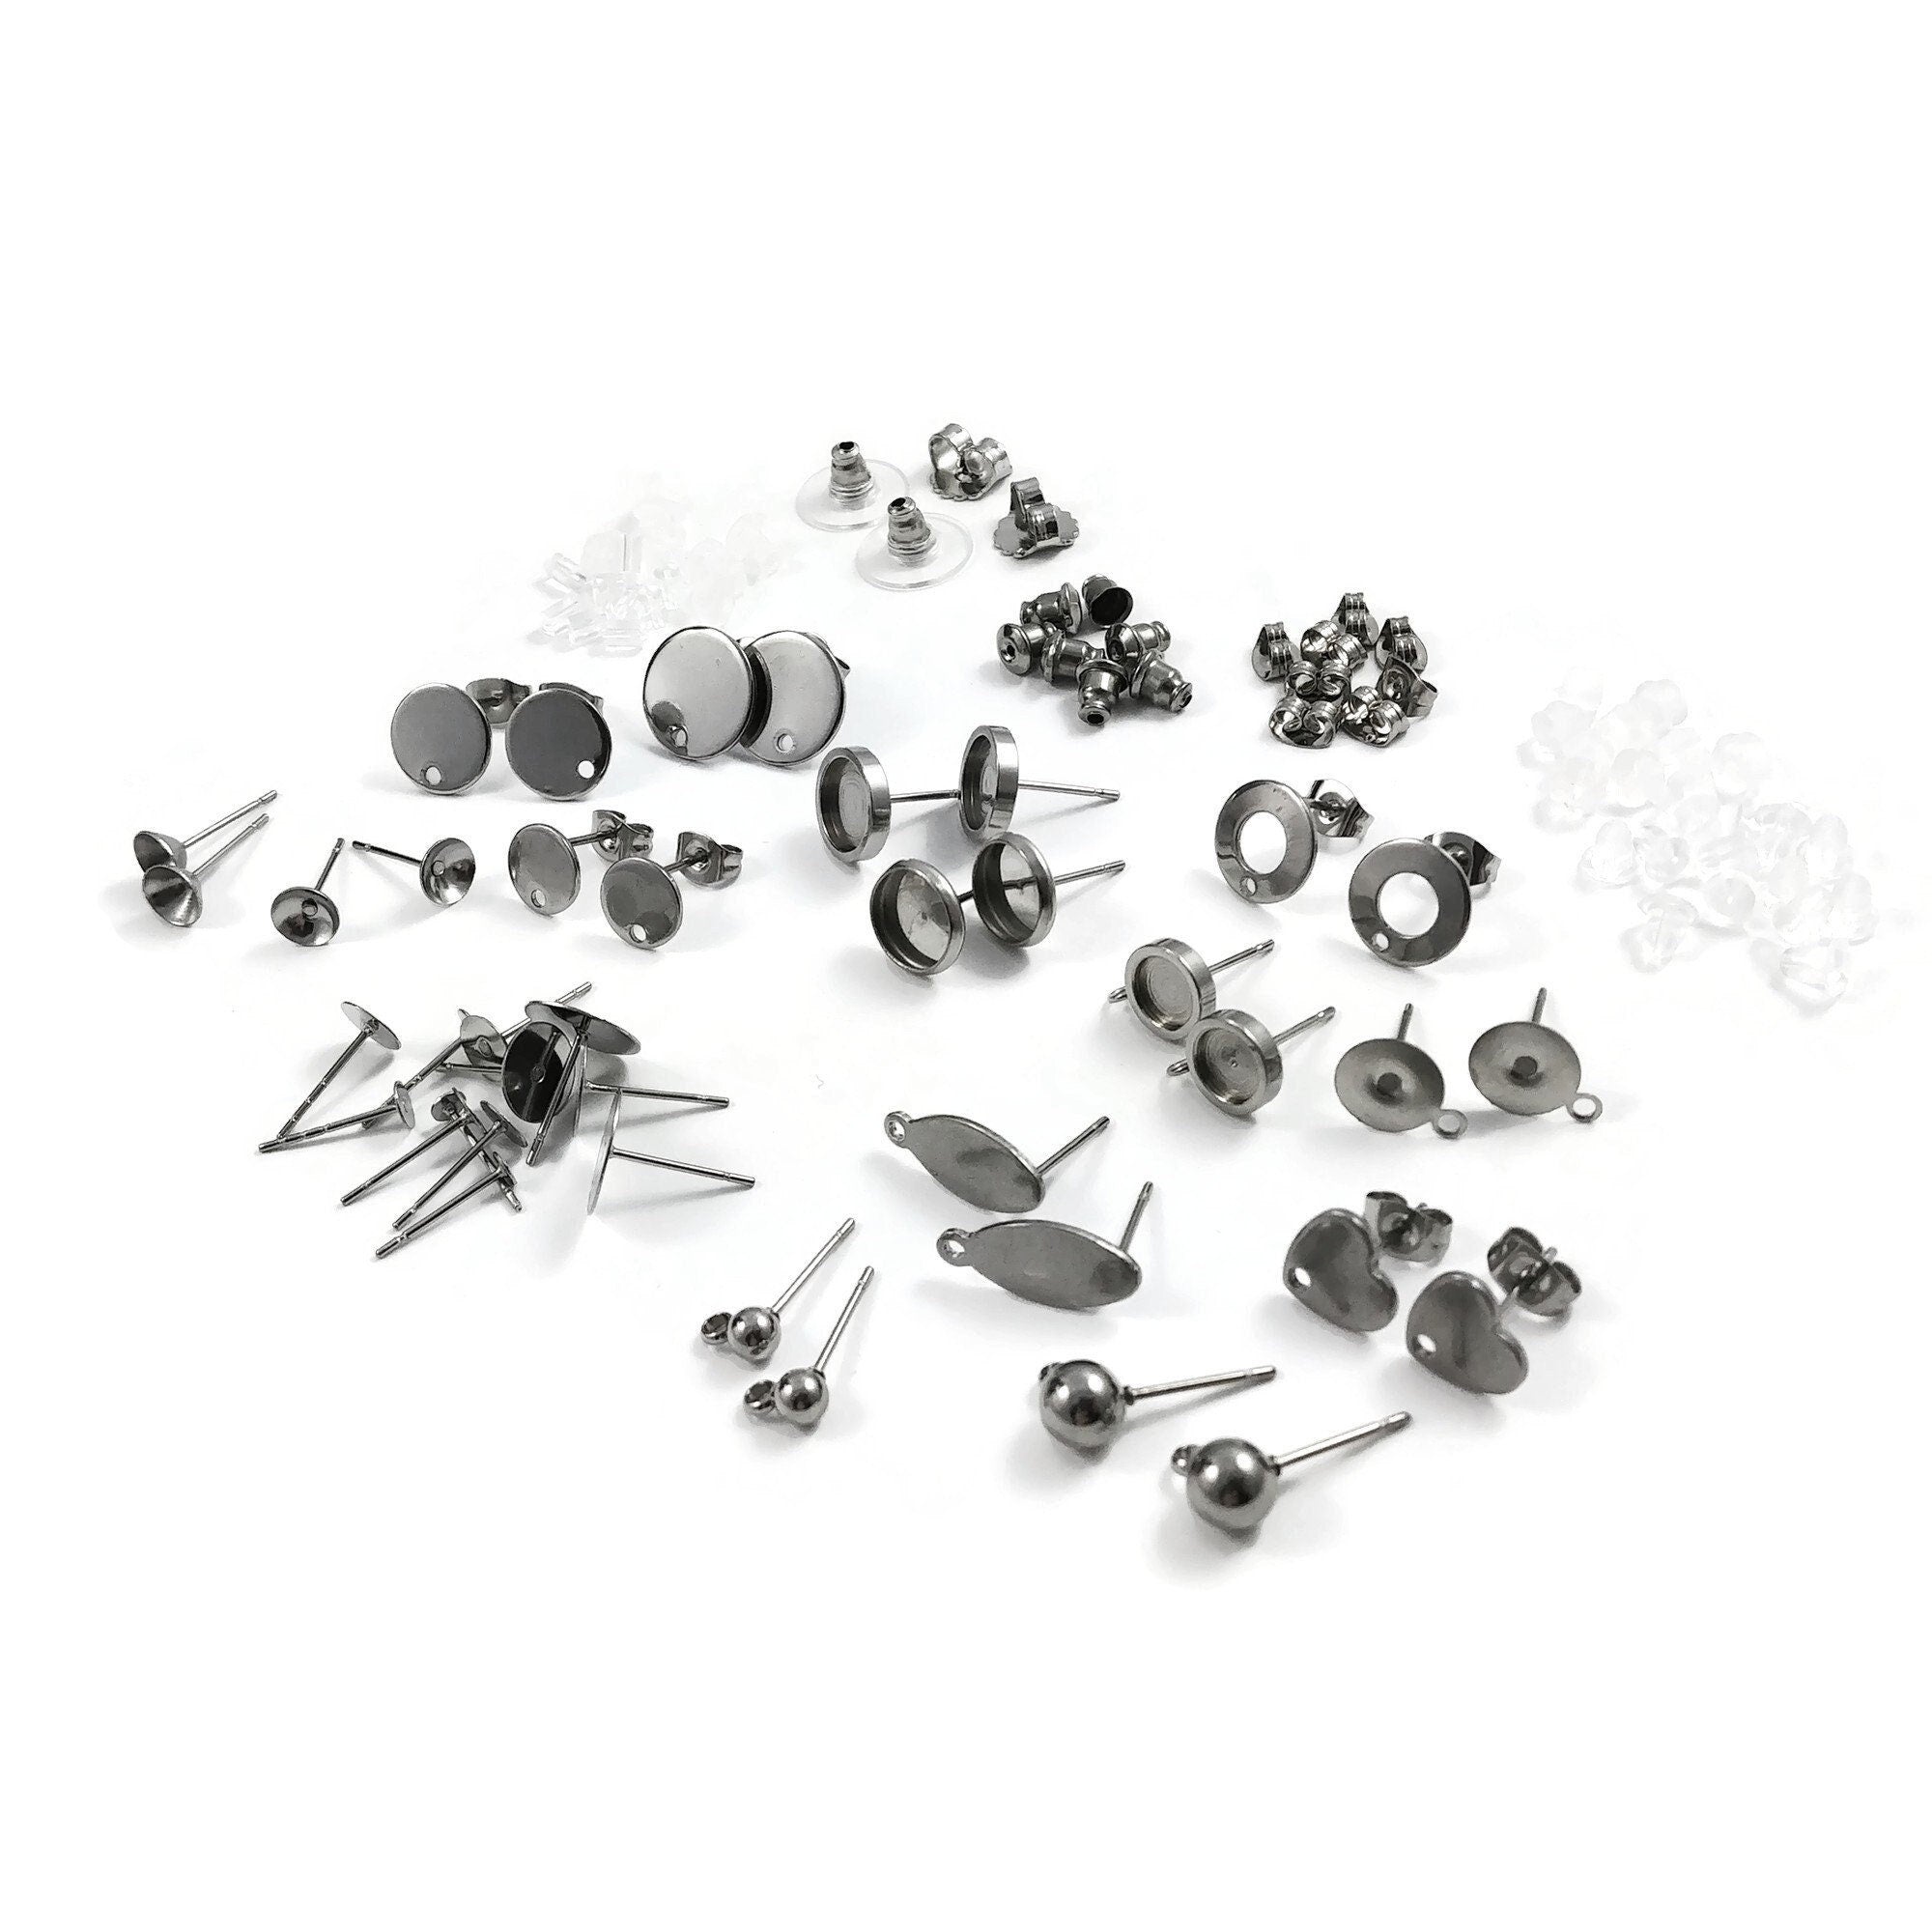 Earring making starter kit, Stainless steel posts 60pcs, Hypoallergenic stud jewelry findings, Sample pack